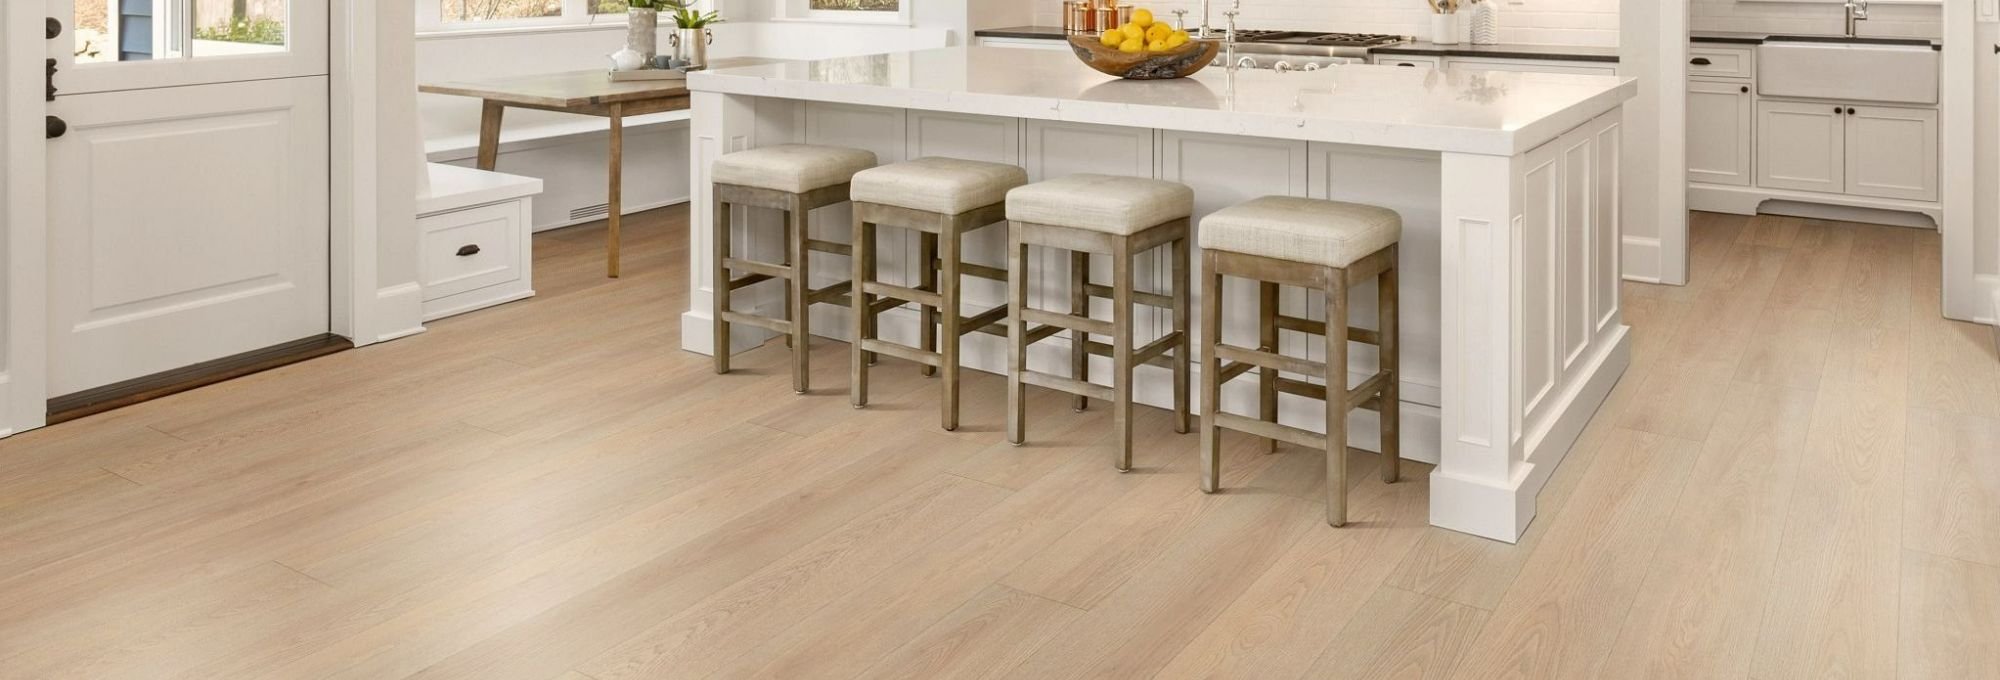 White kitchen island and white chairs with white kitchen cabinets and brown hardwood flooring from Butler Floors in the Austin, TX area